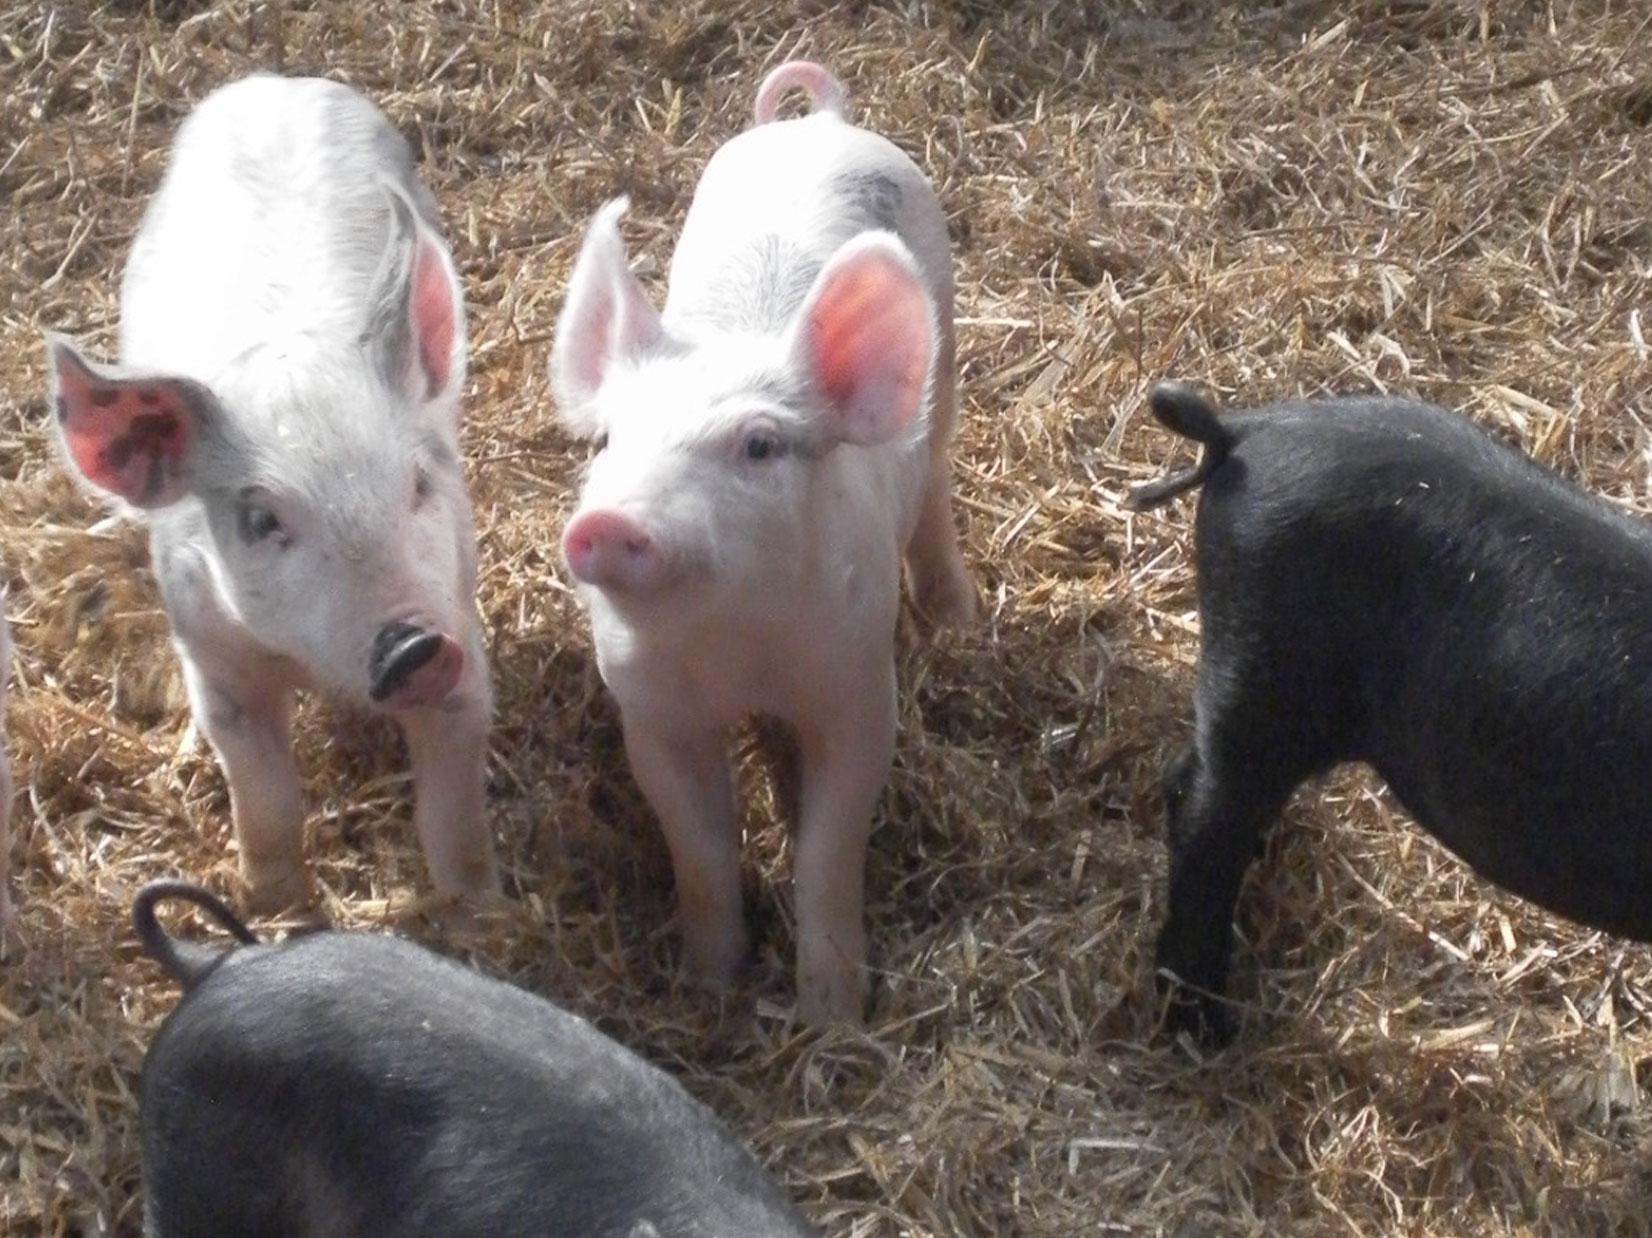 Orchard Hill Farm Holiday Lets with Piglets 